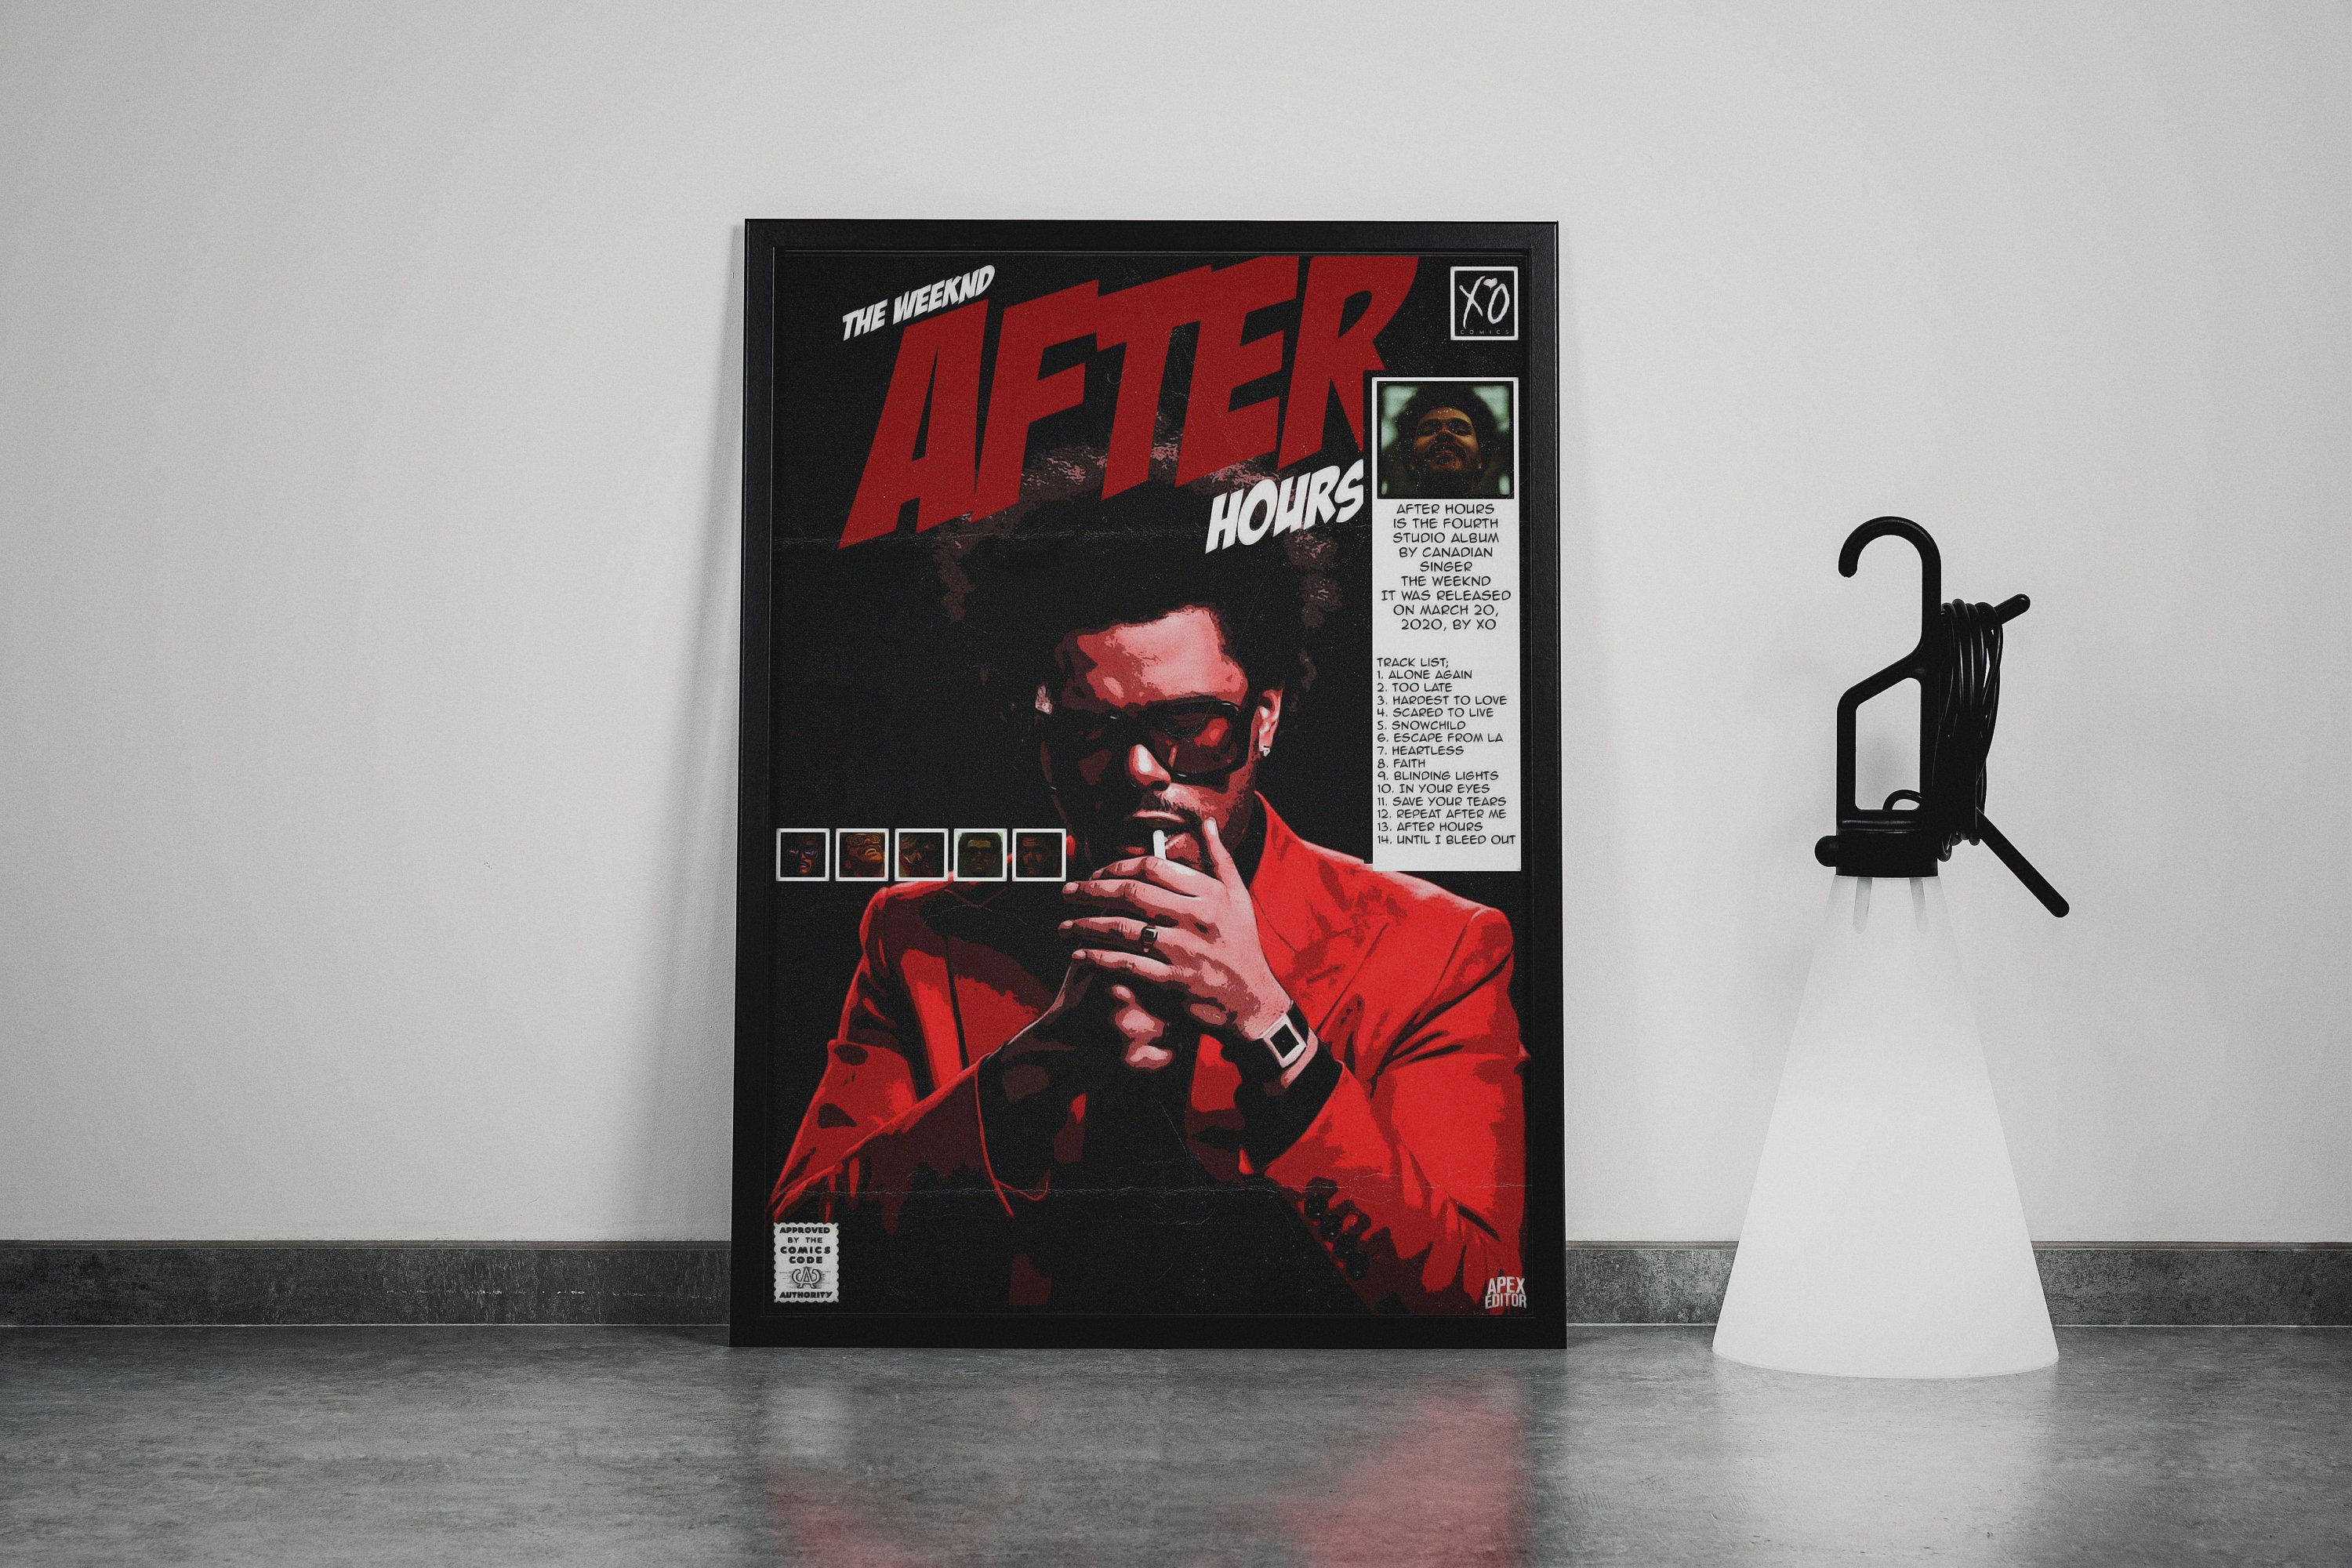 The Weeknd Poster After Hours Poster Album Cover Posters for Room Decor